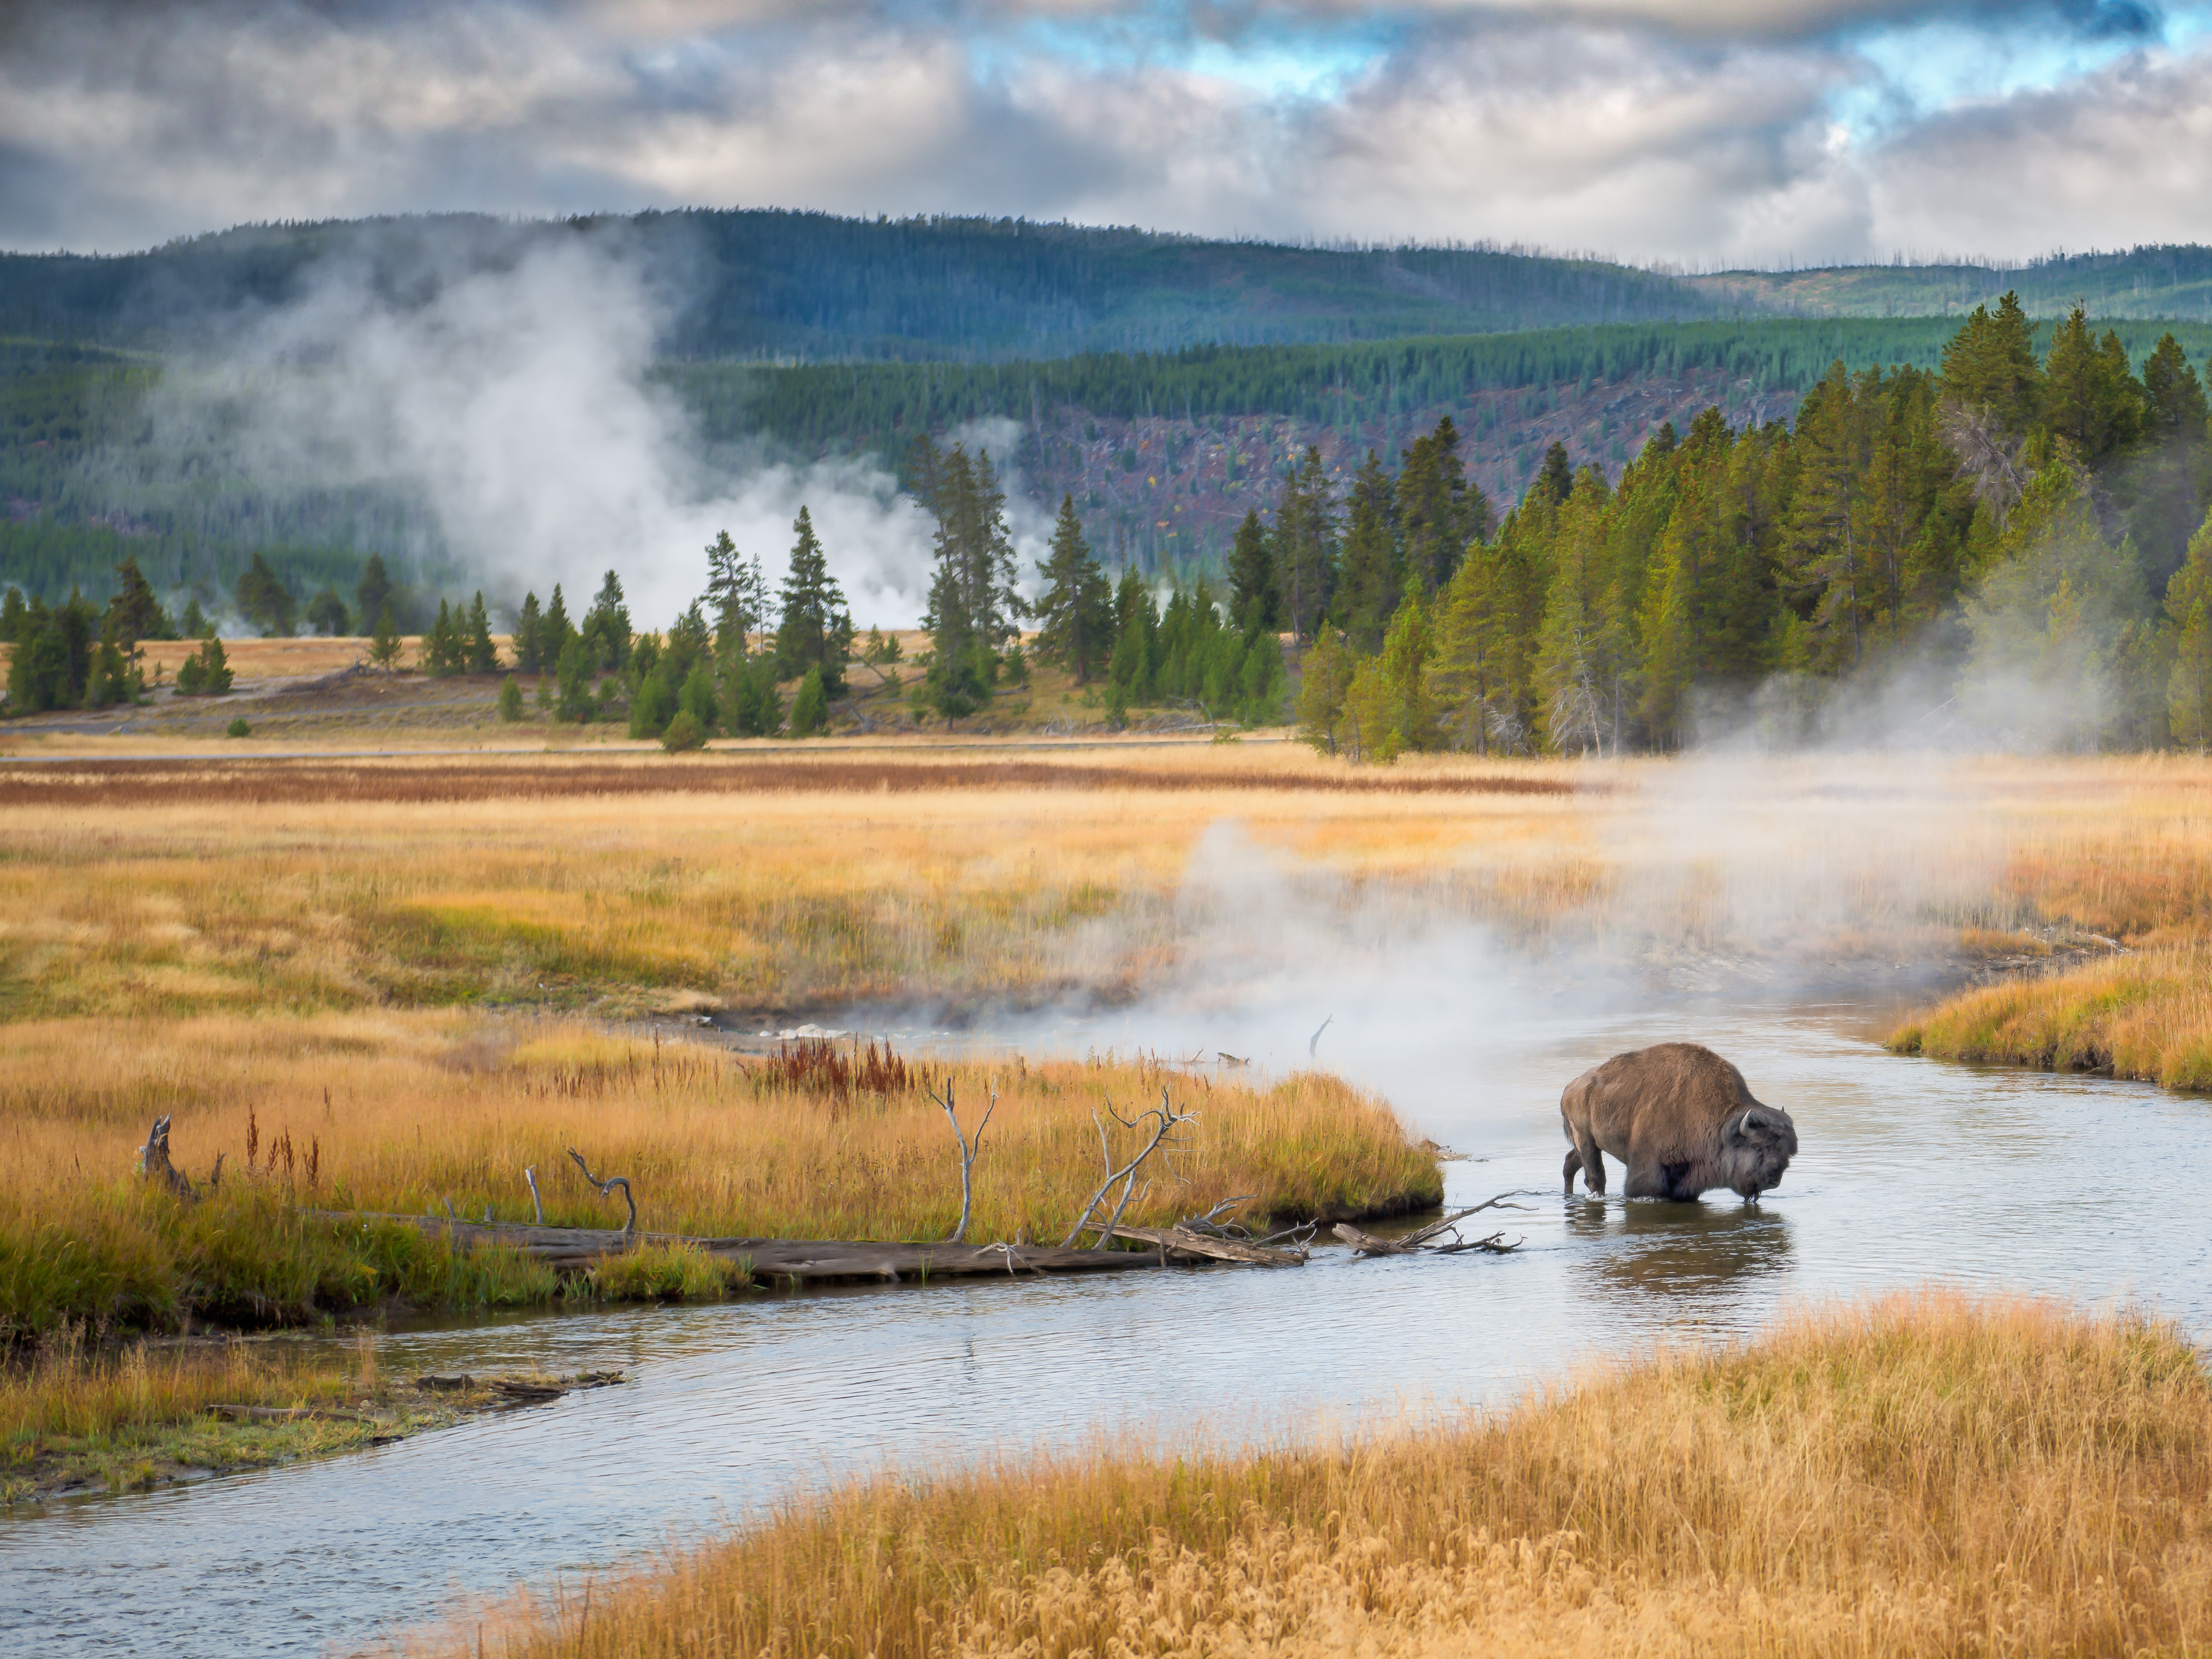 Bison and steam vents in Yellowstone.